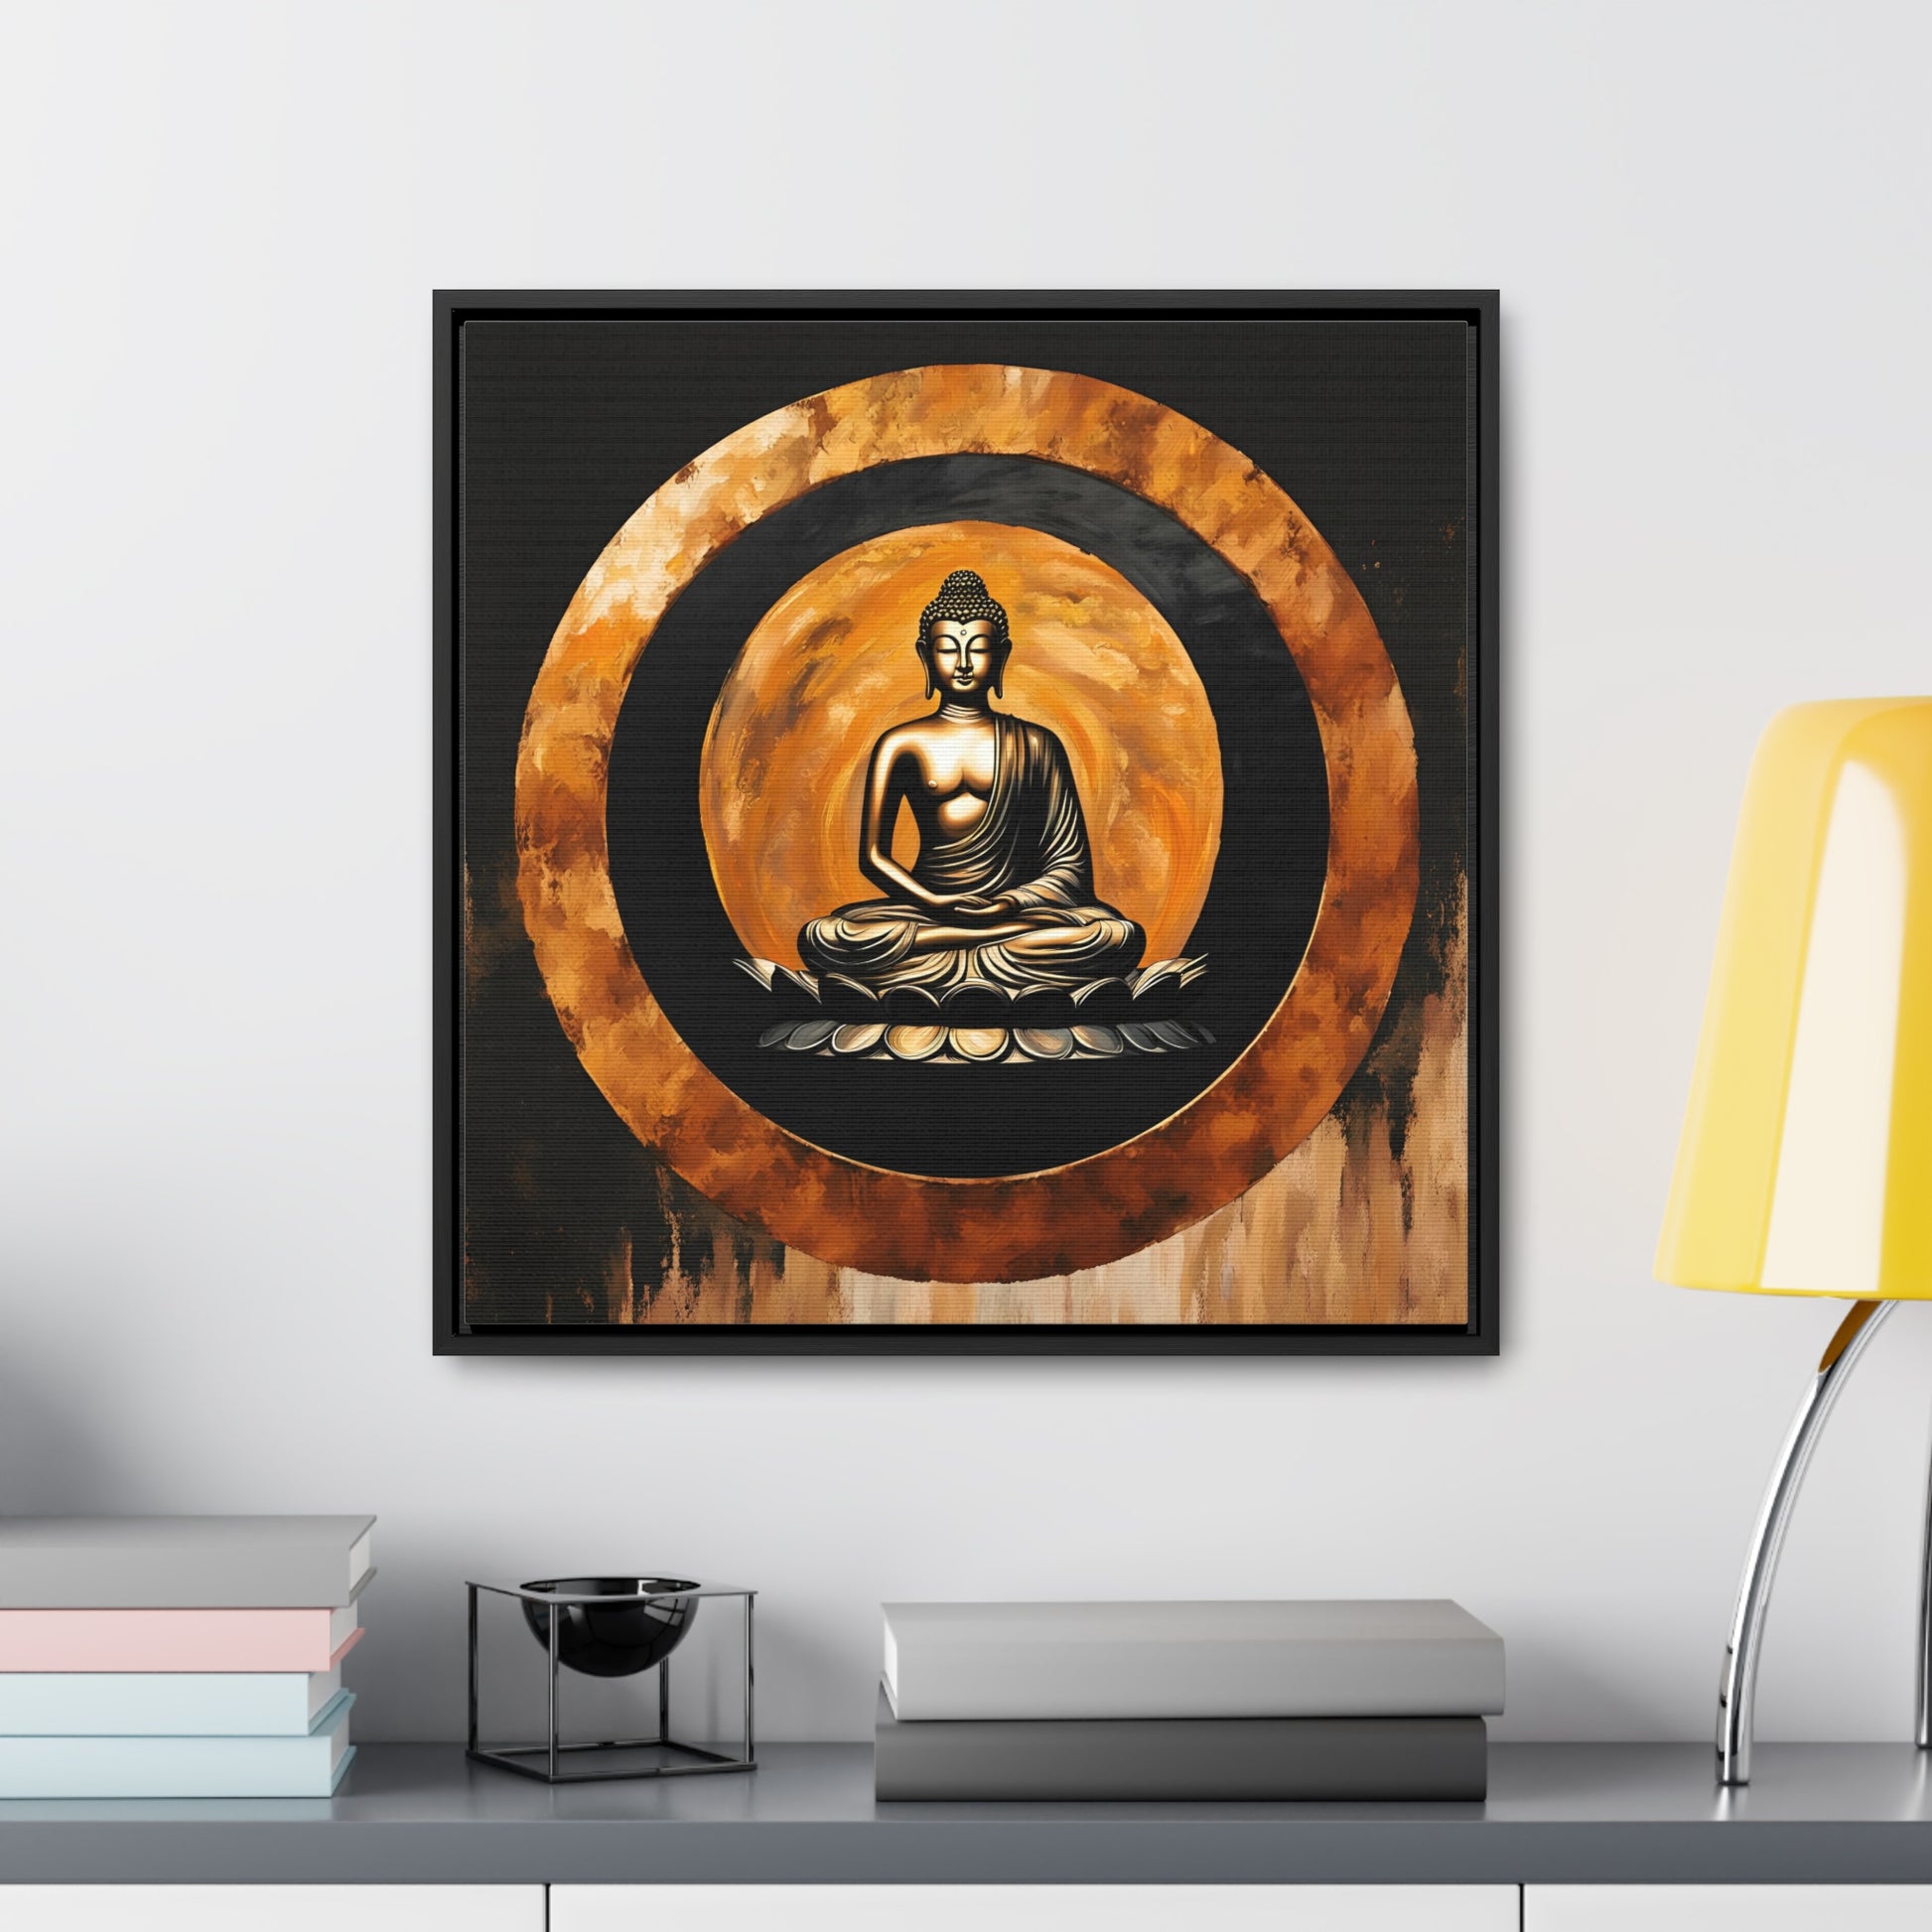 Golden Sitting Buddha in a Gold Enso Circle Print on Canvas 24x24